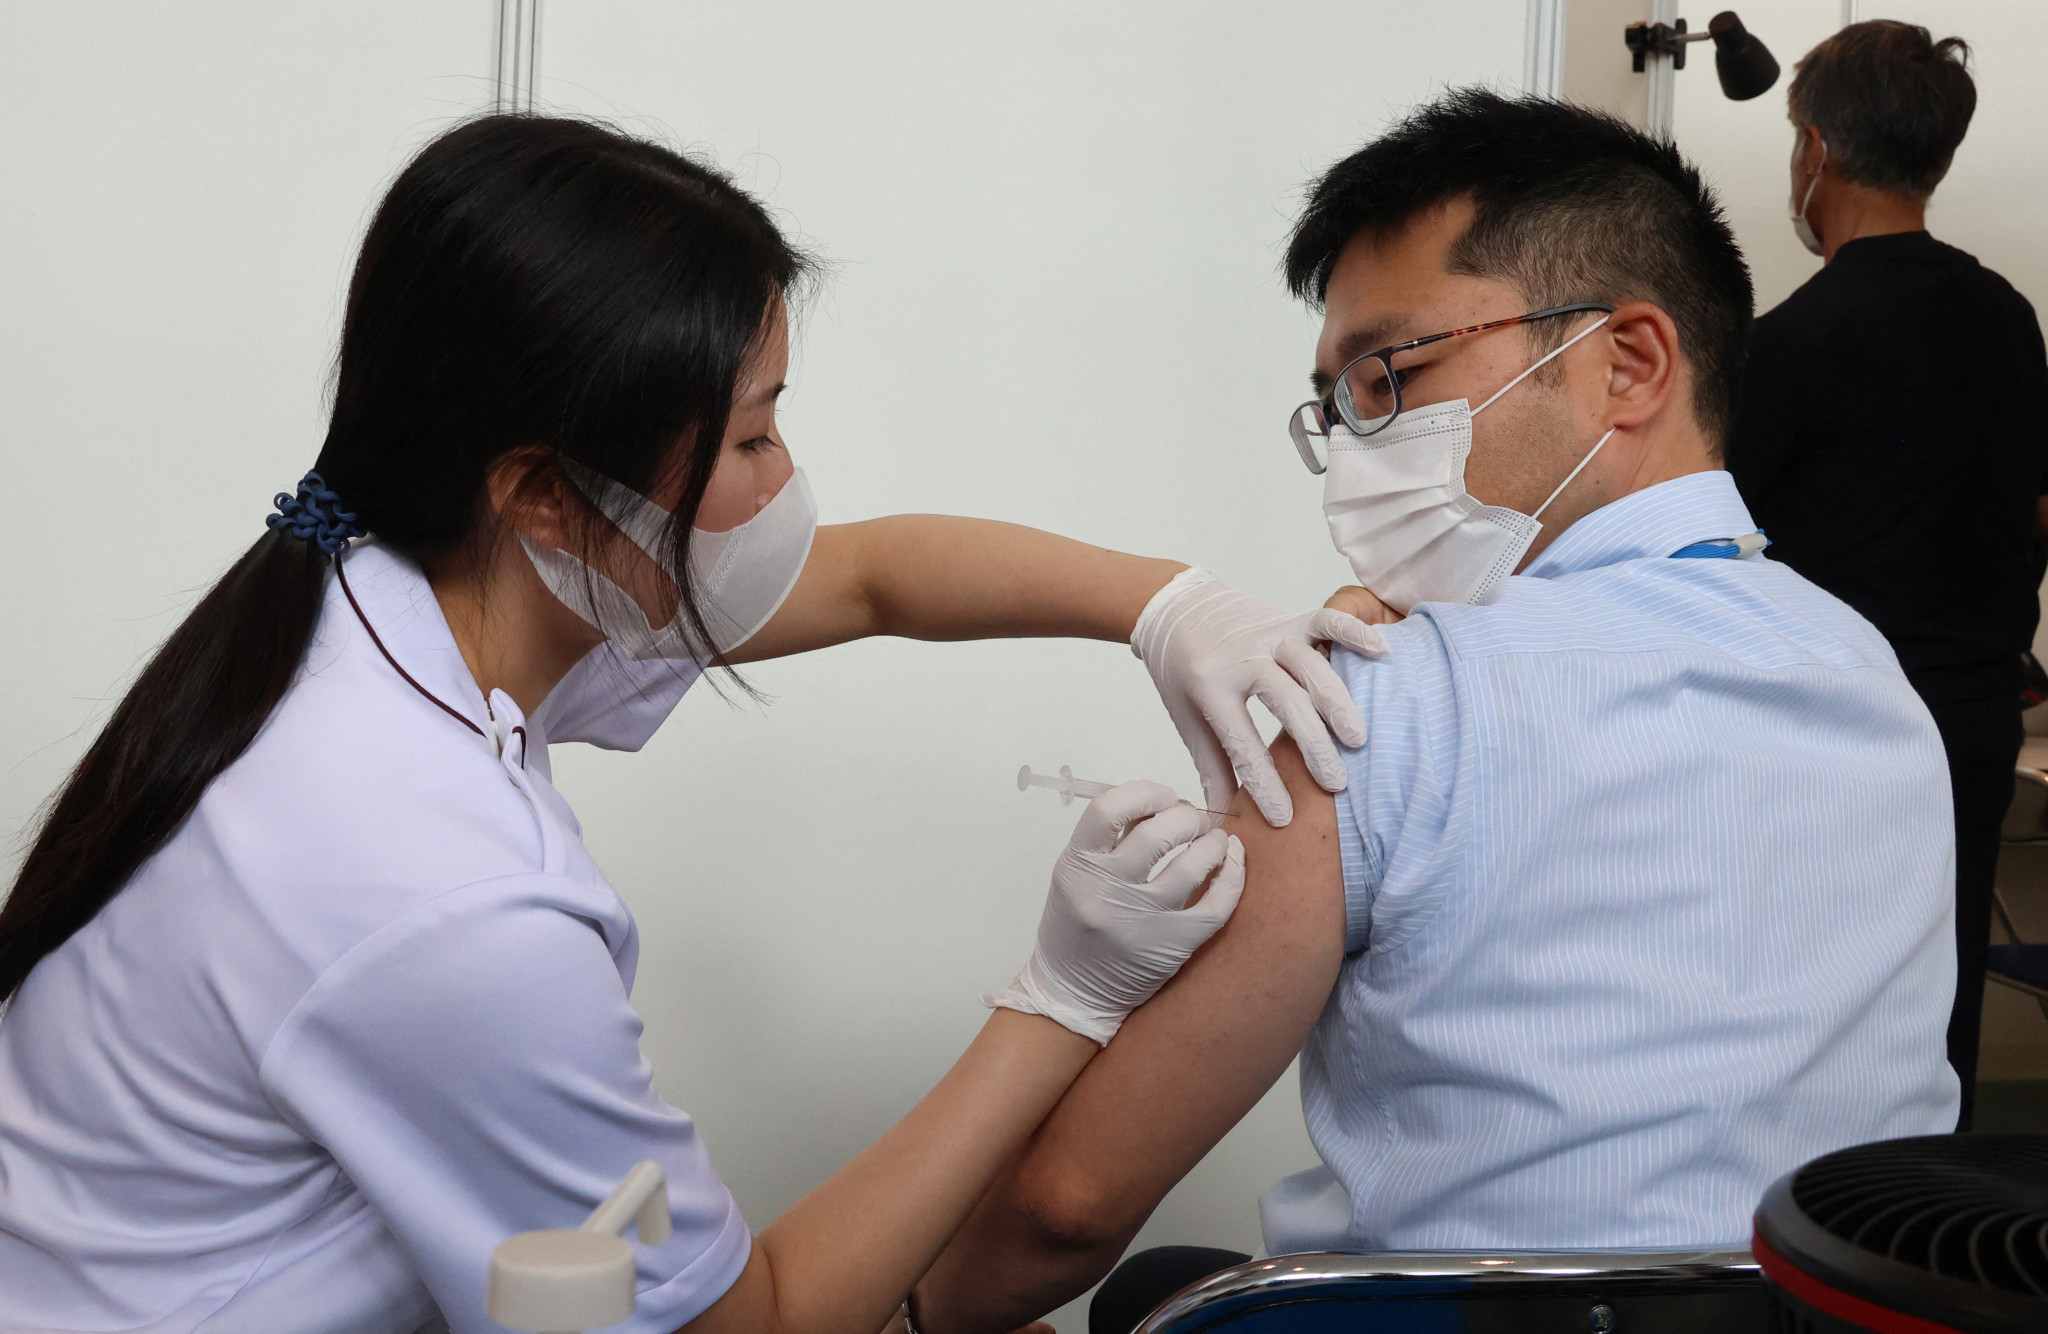 Workers at Tokyo 2020 start to receive COVID-19 vaccinations